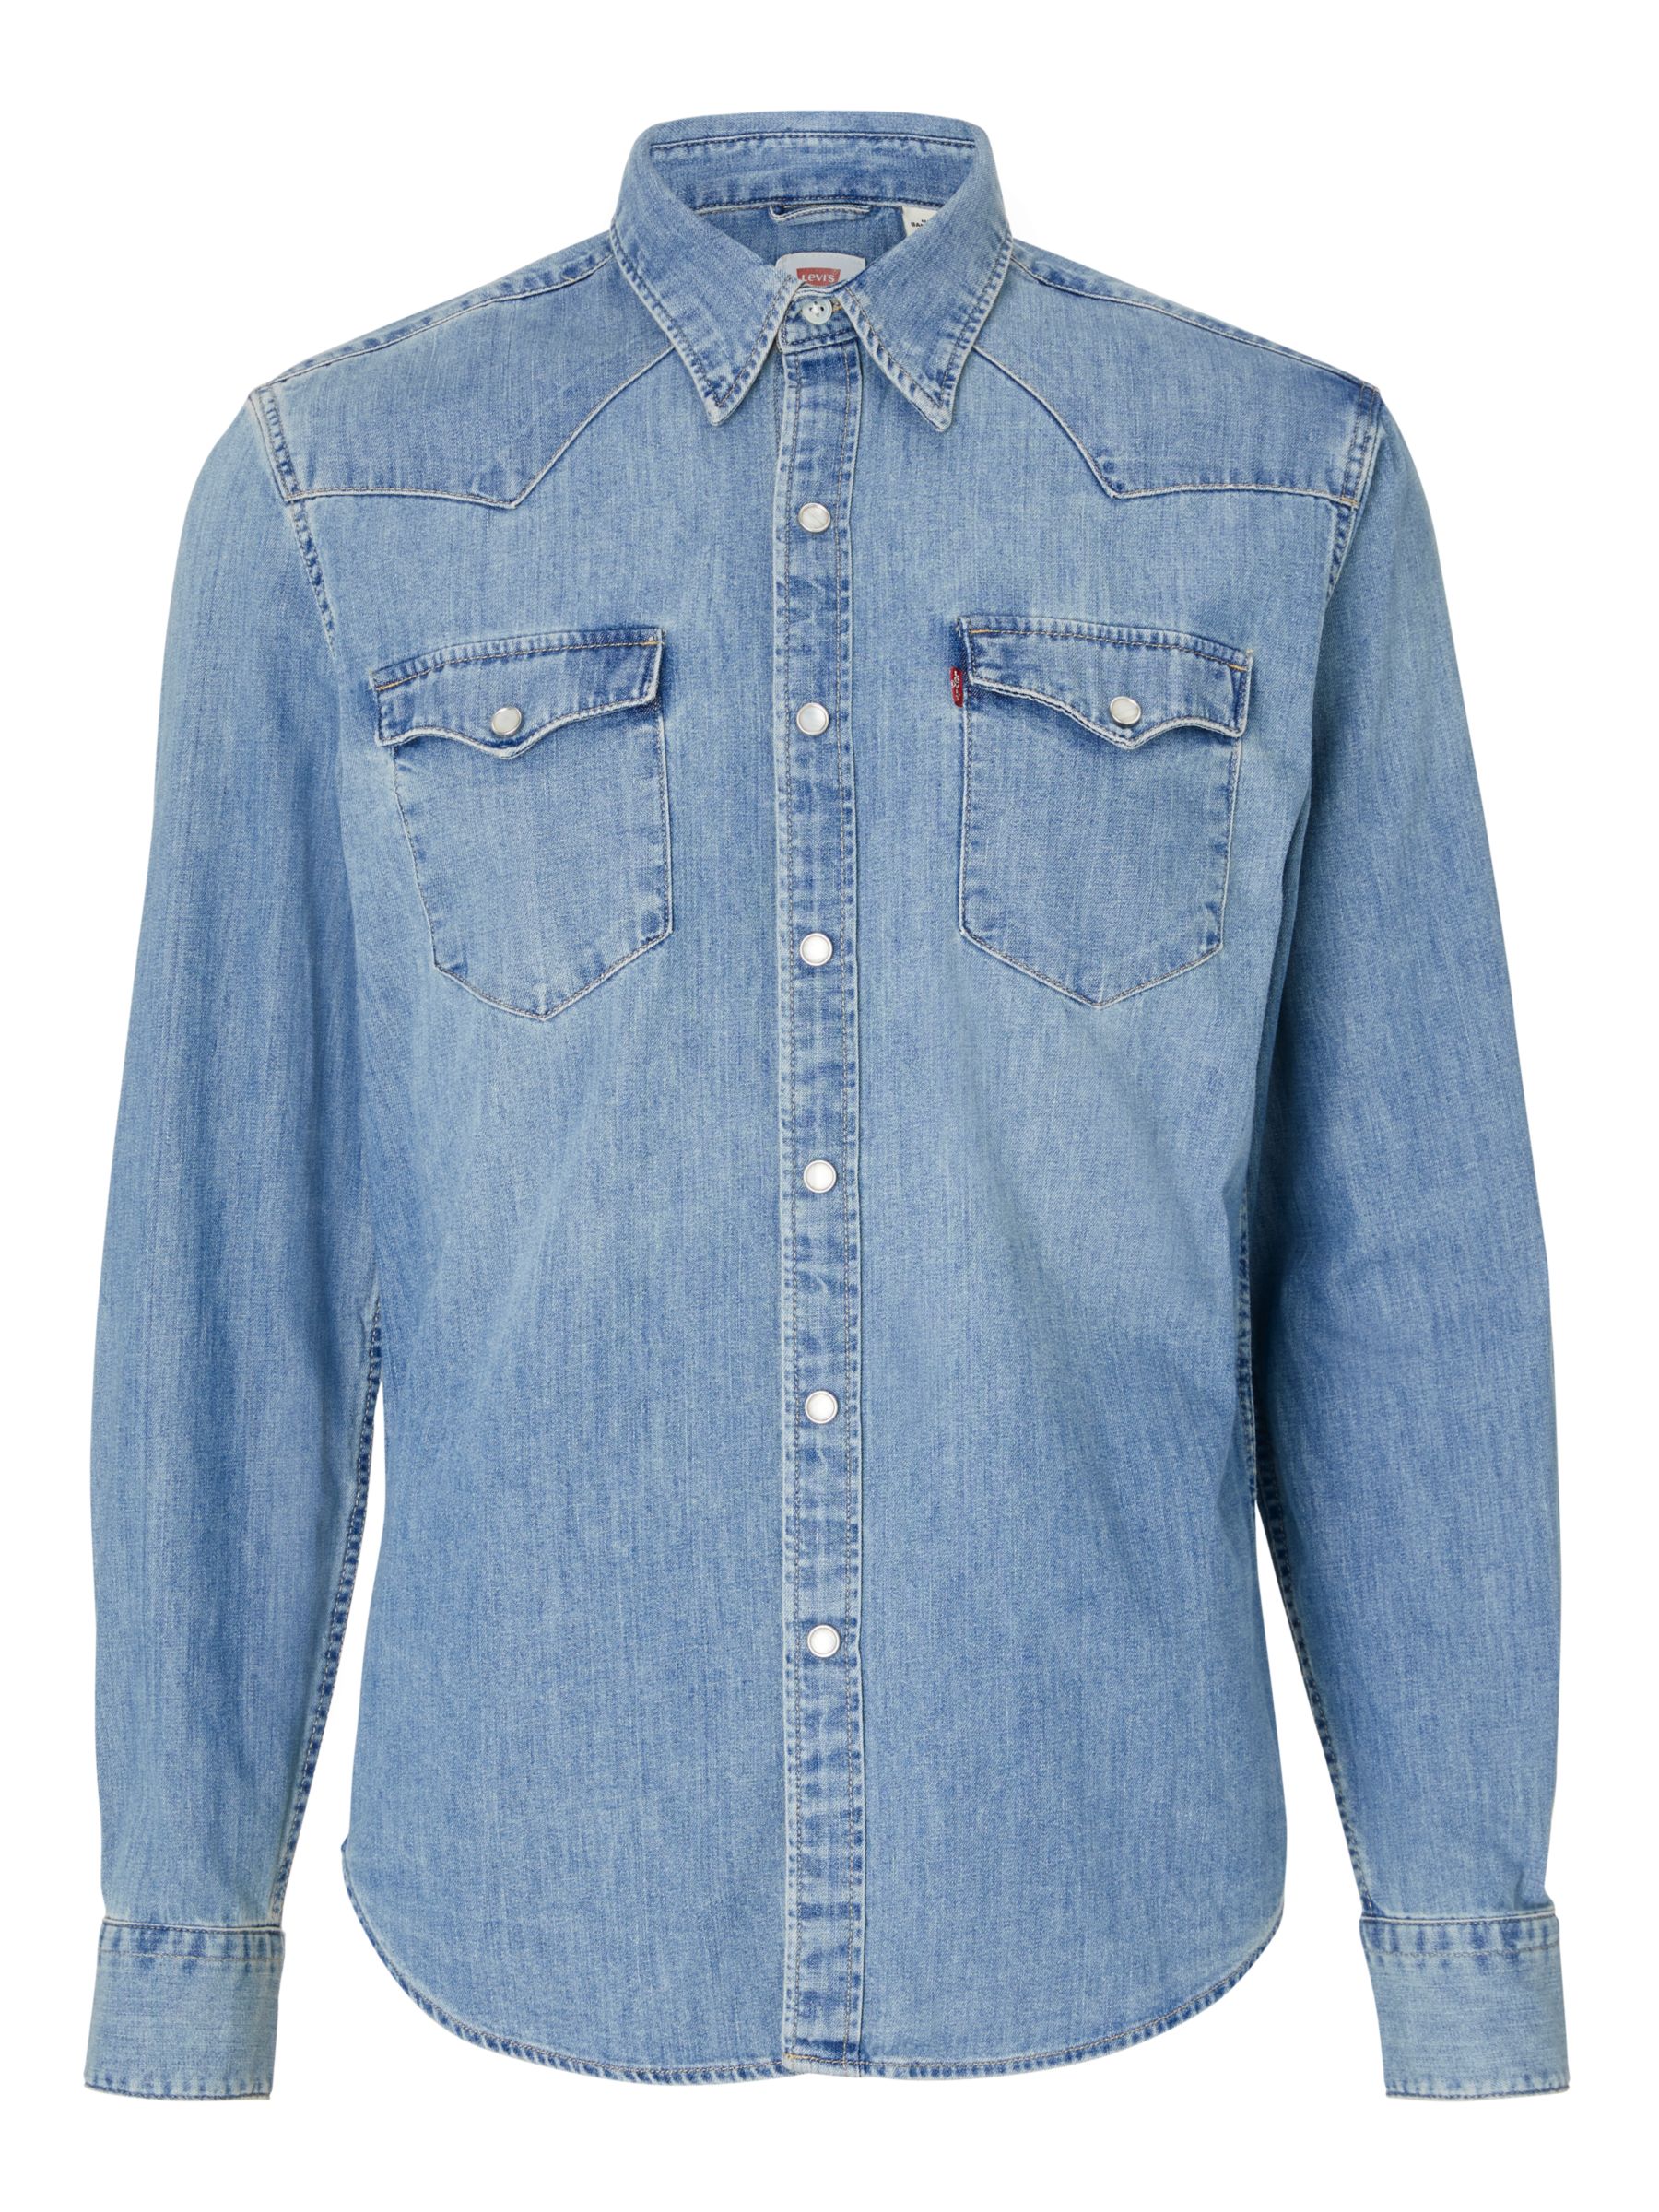 Levi's Barstow West Denim Shirt, Red Cast Stone at John Lewis